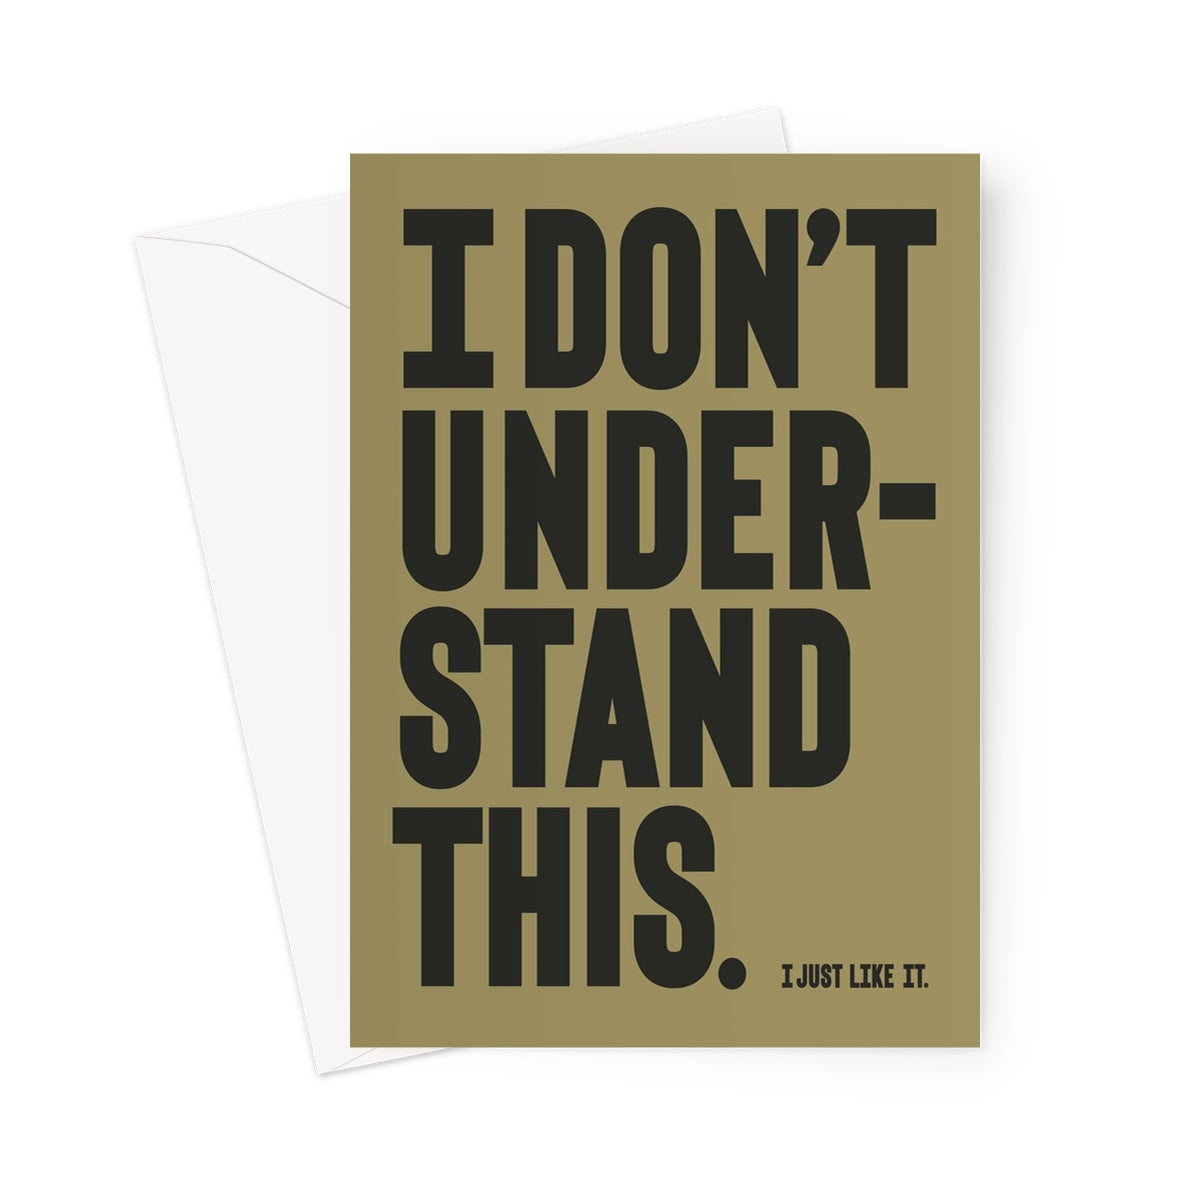 I DON'T UNDERSTAND - Olive / Carcoal Greeting Card